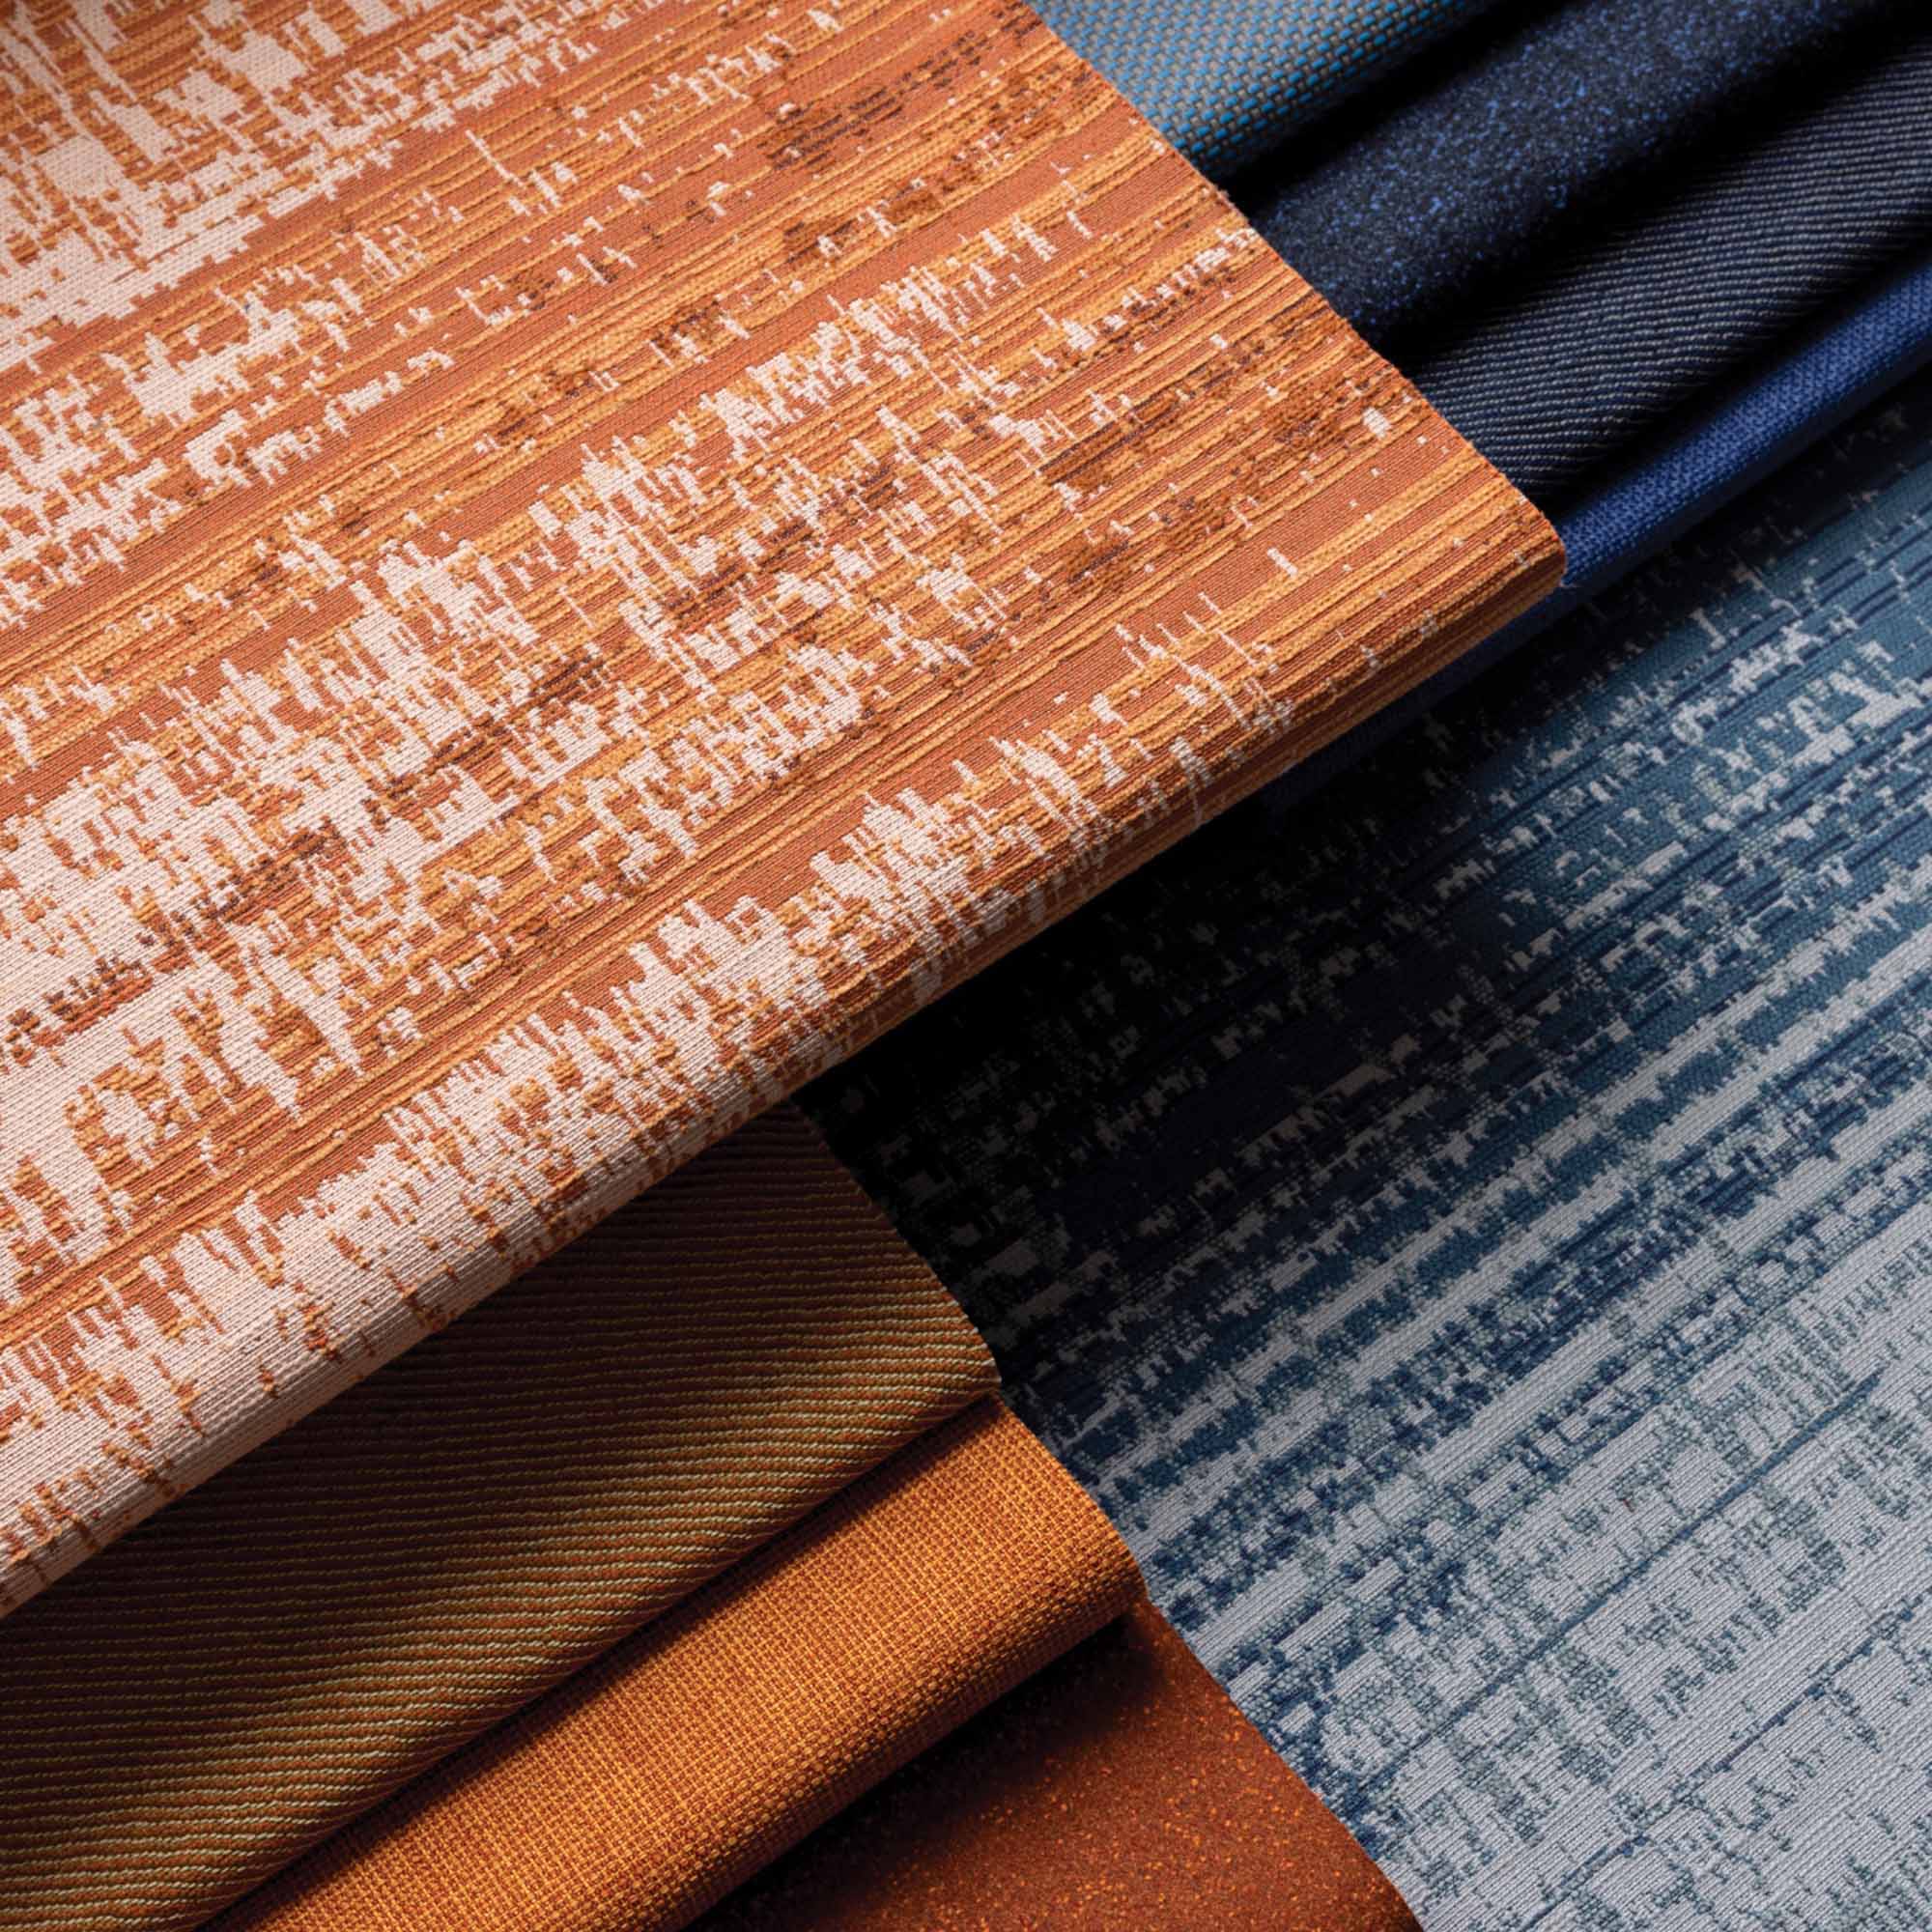 Luum Fabric of Space
Made of recycled and renewable fibers
